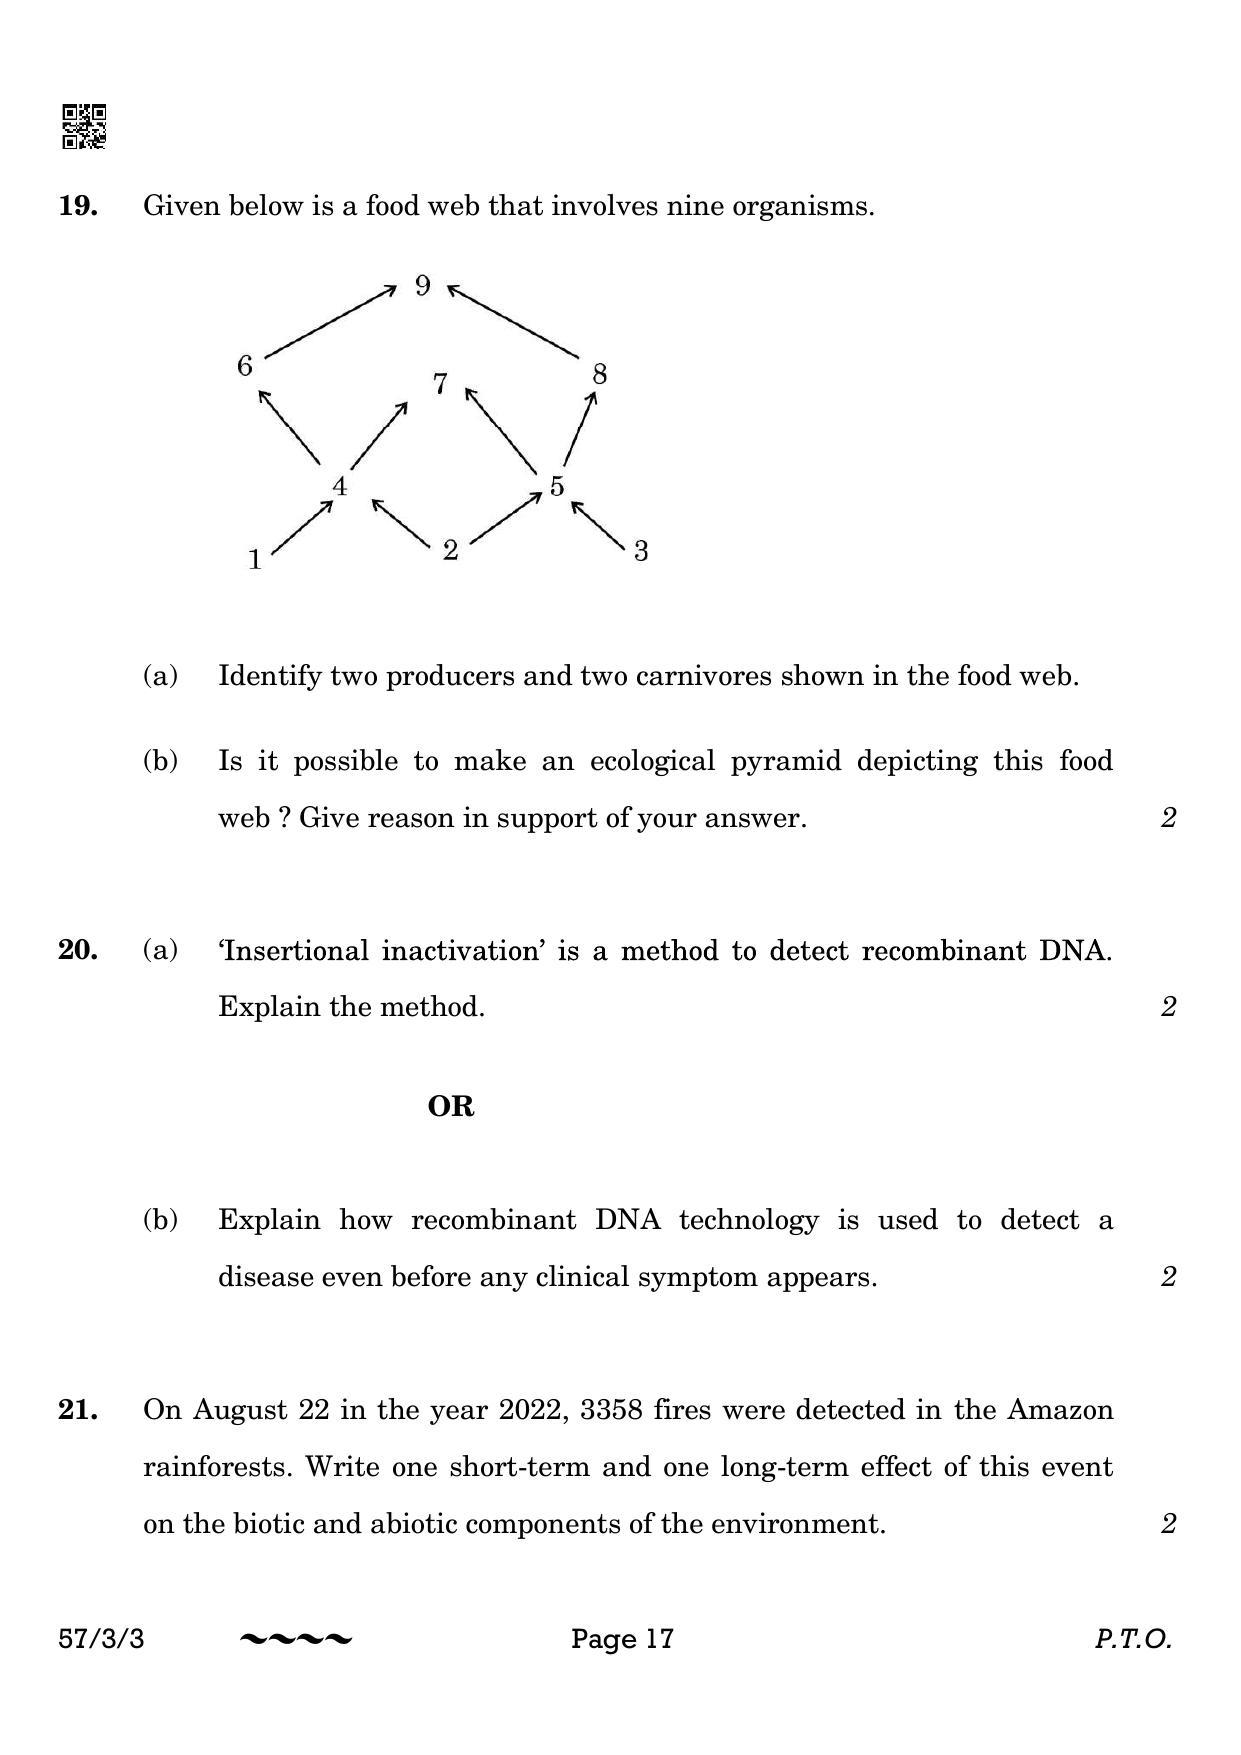 CBSE Class 12 57-3-3 Biology 2023 Question Paper - Page 17